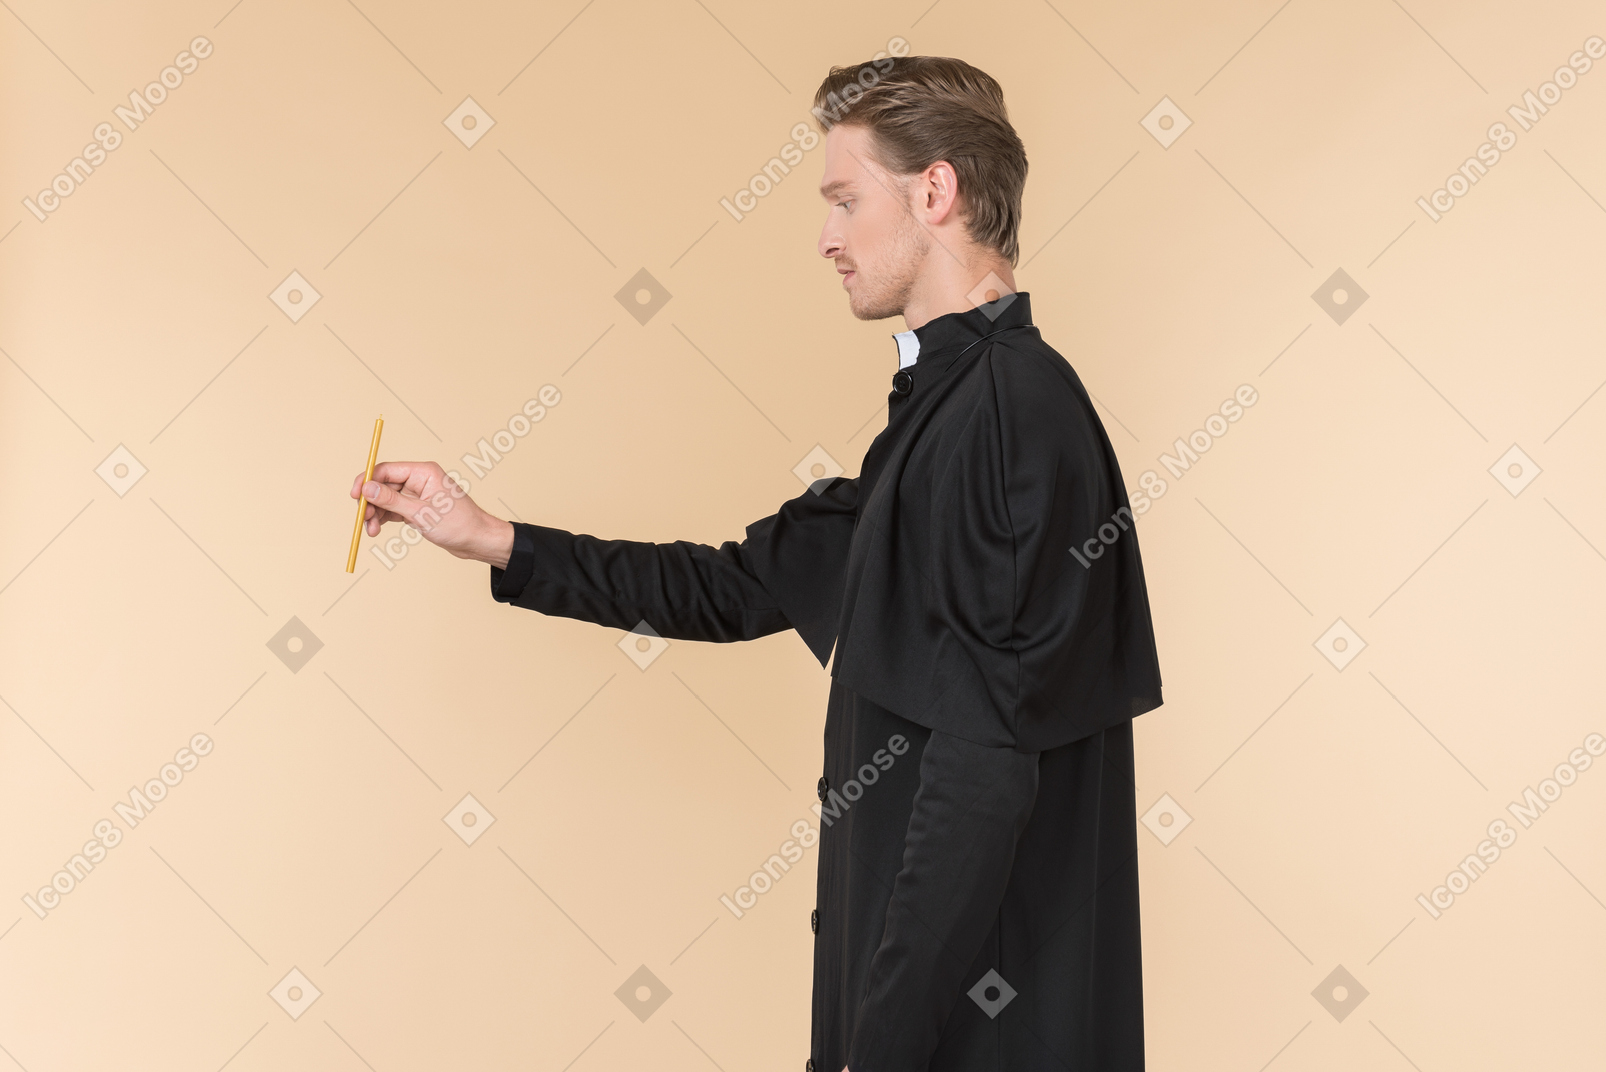 Catholic priest standing in profile and holding a candle